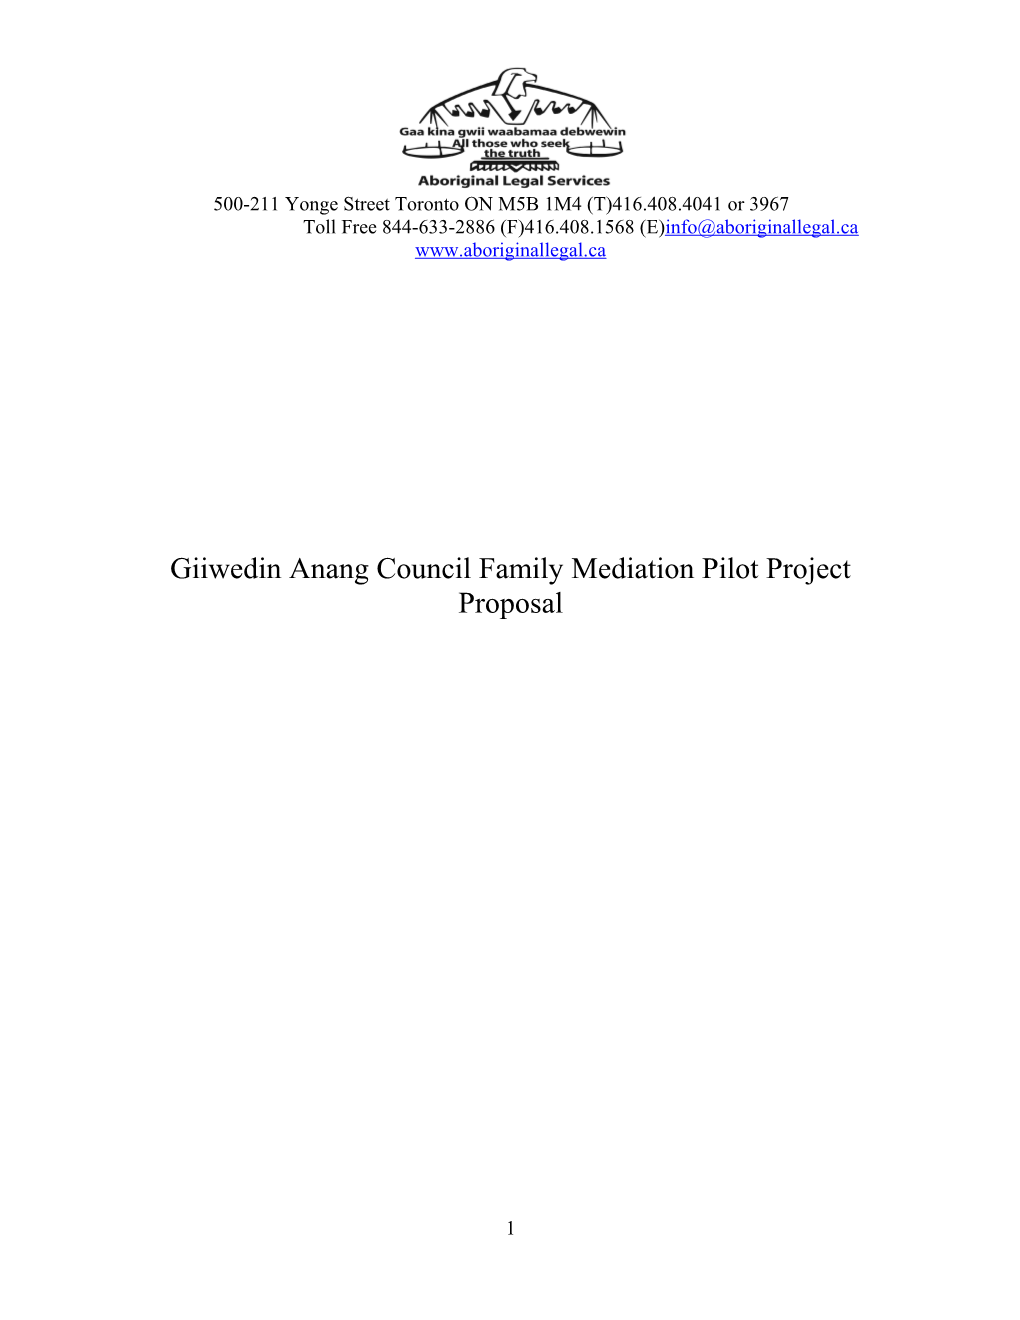 Giiwedin Anang Council Family Mediation Pilot Project